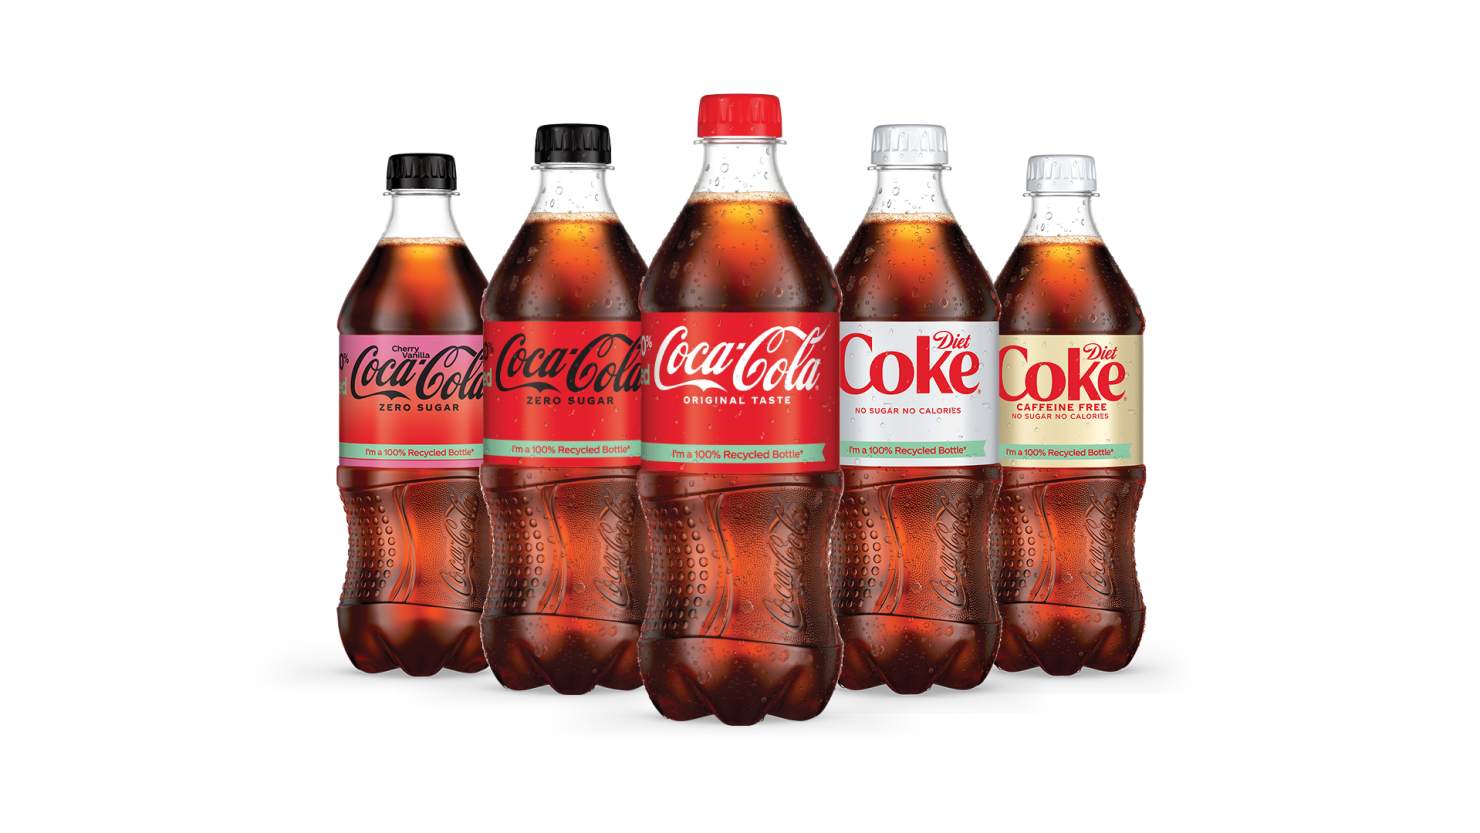 Coca-Cola's new bottles, made from recyclable materials, rolls out this week.